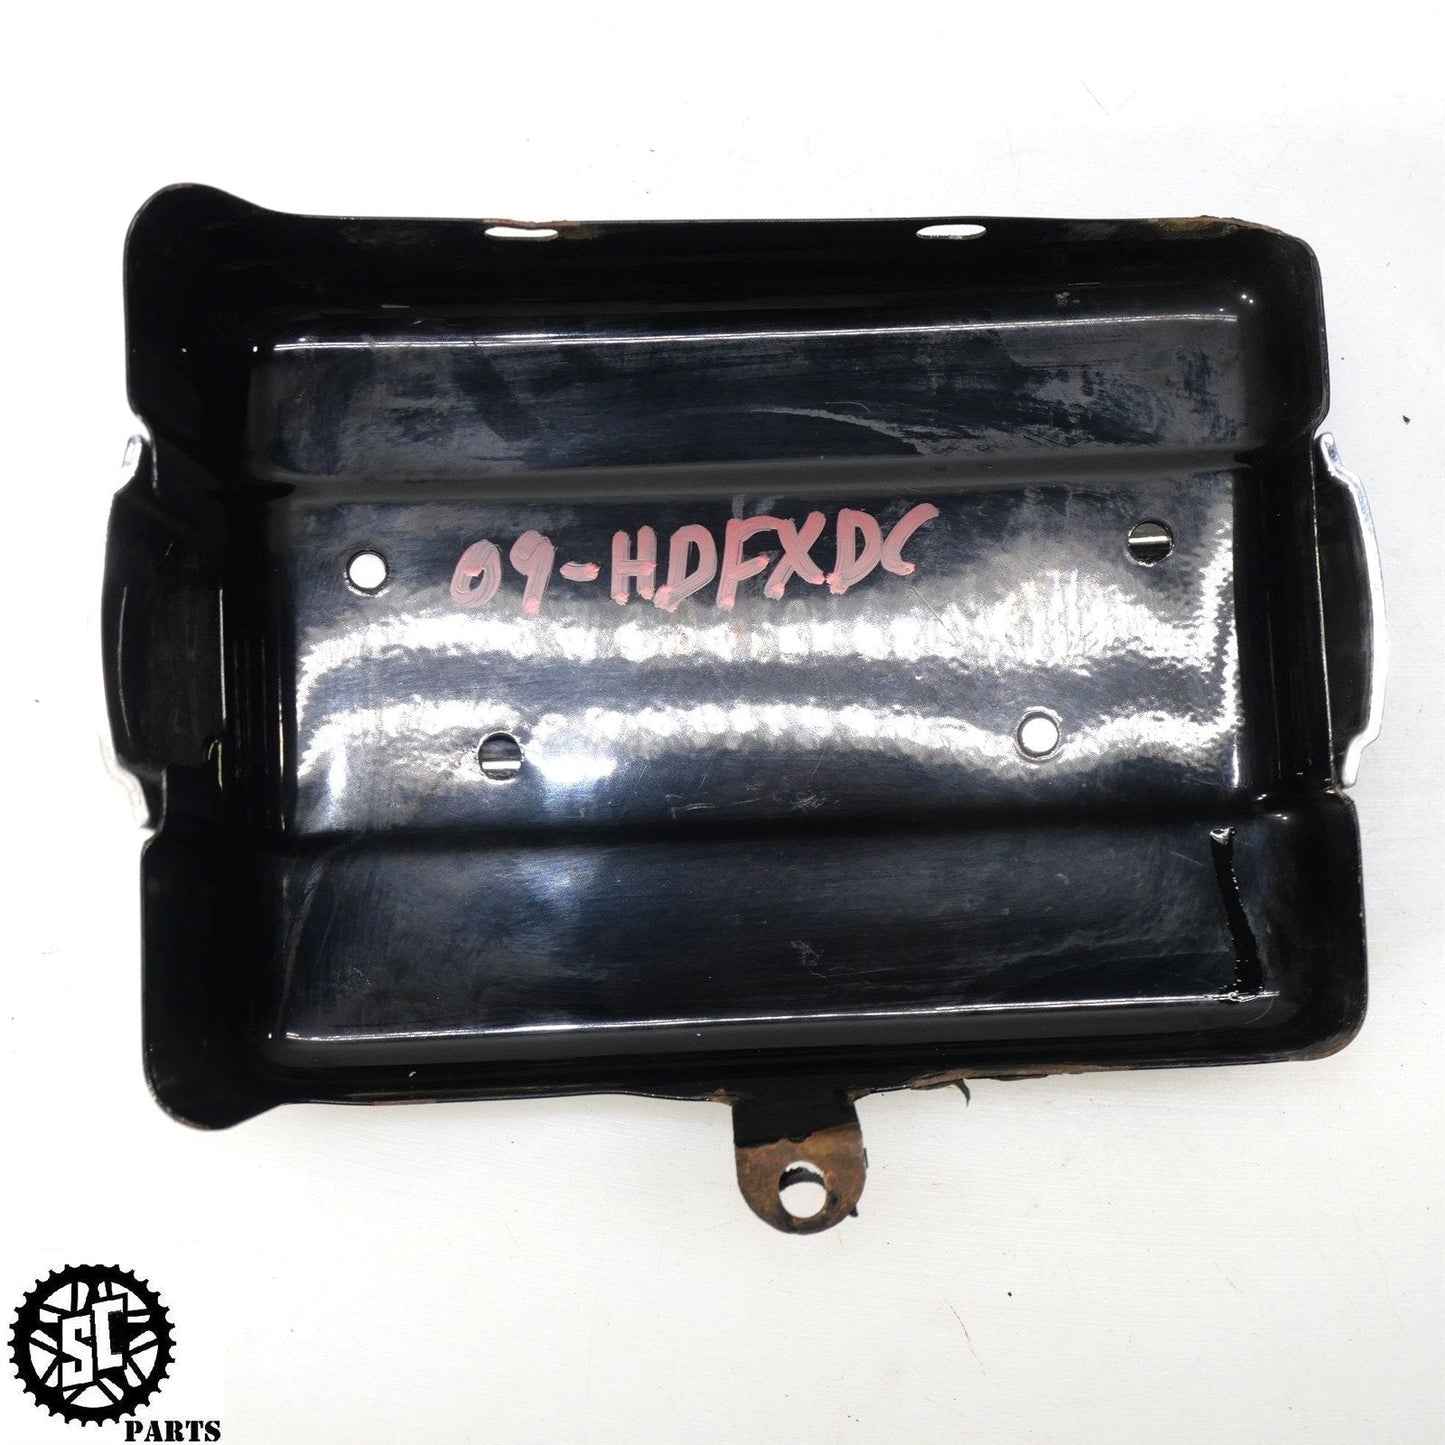 2007-2017 HARLEY-DAVIDSON DYNA RIGHT SIDE FRAME BATTERY BOX COVER HD21